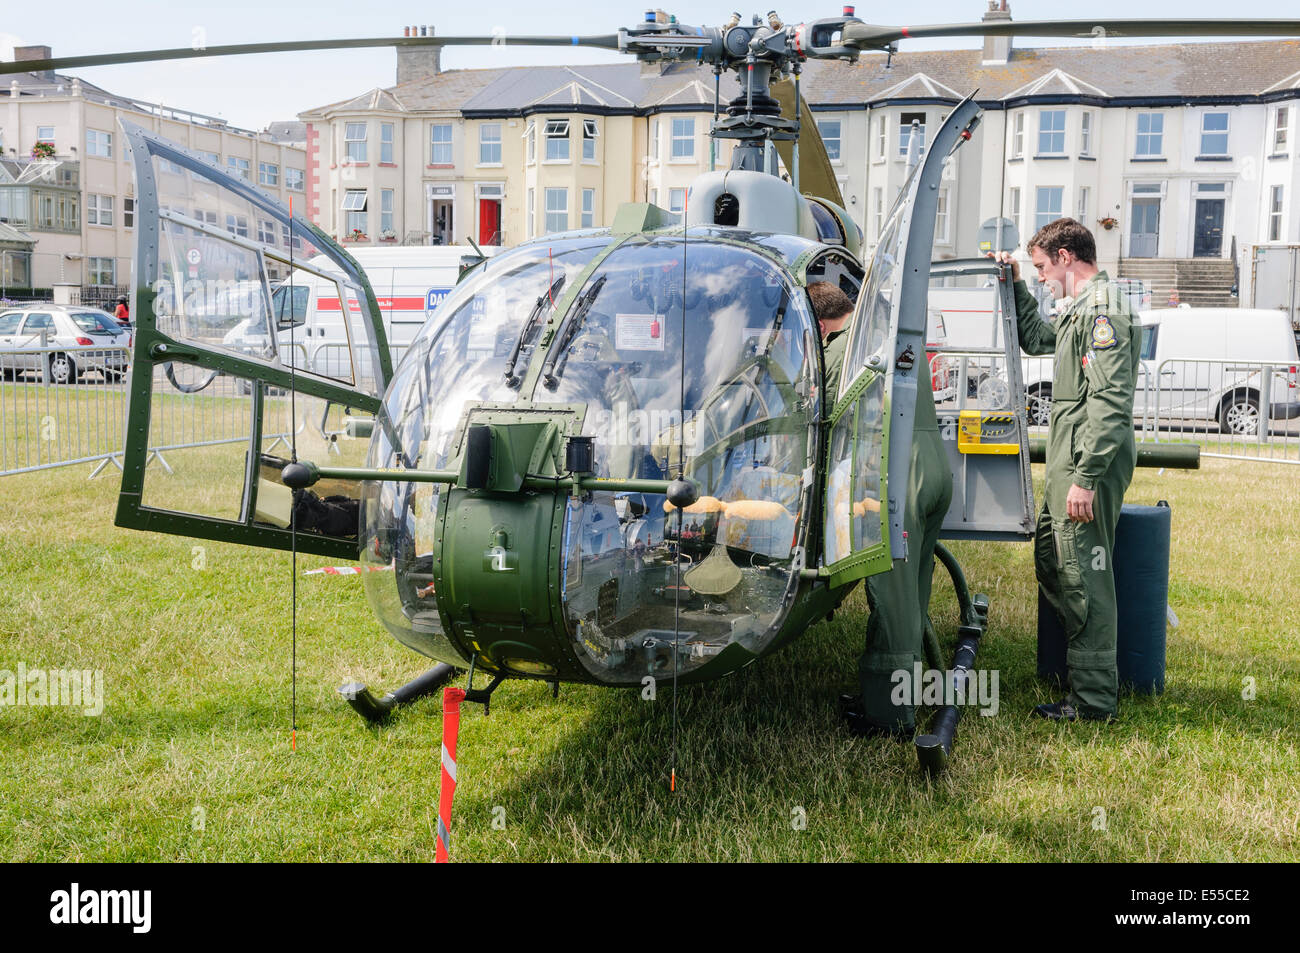 Gazelle Helicopter from the Irish Army on the ground at Bray Air Show, Ireland Stock Photo